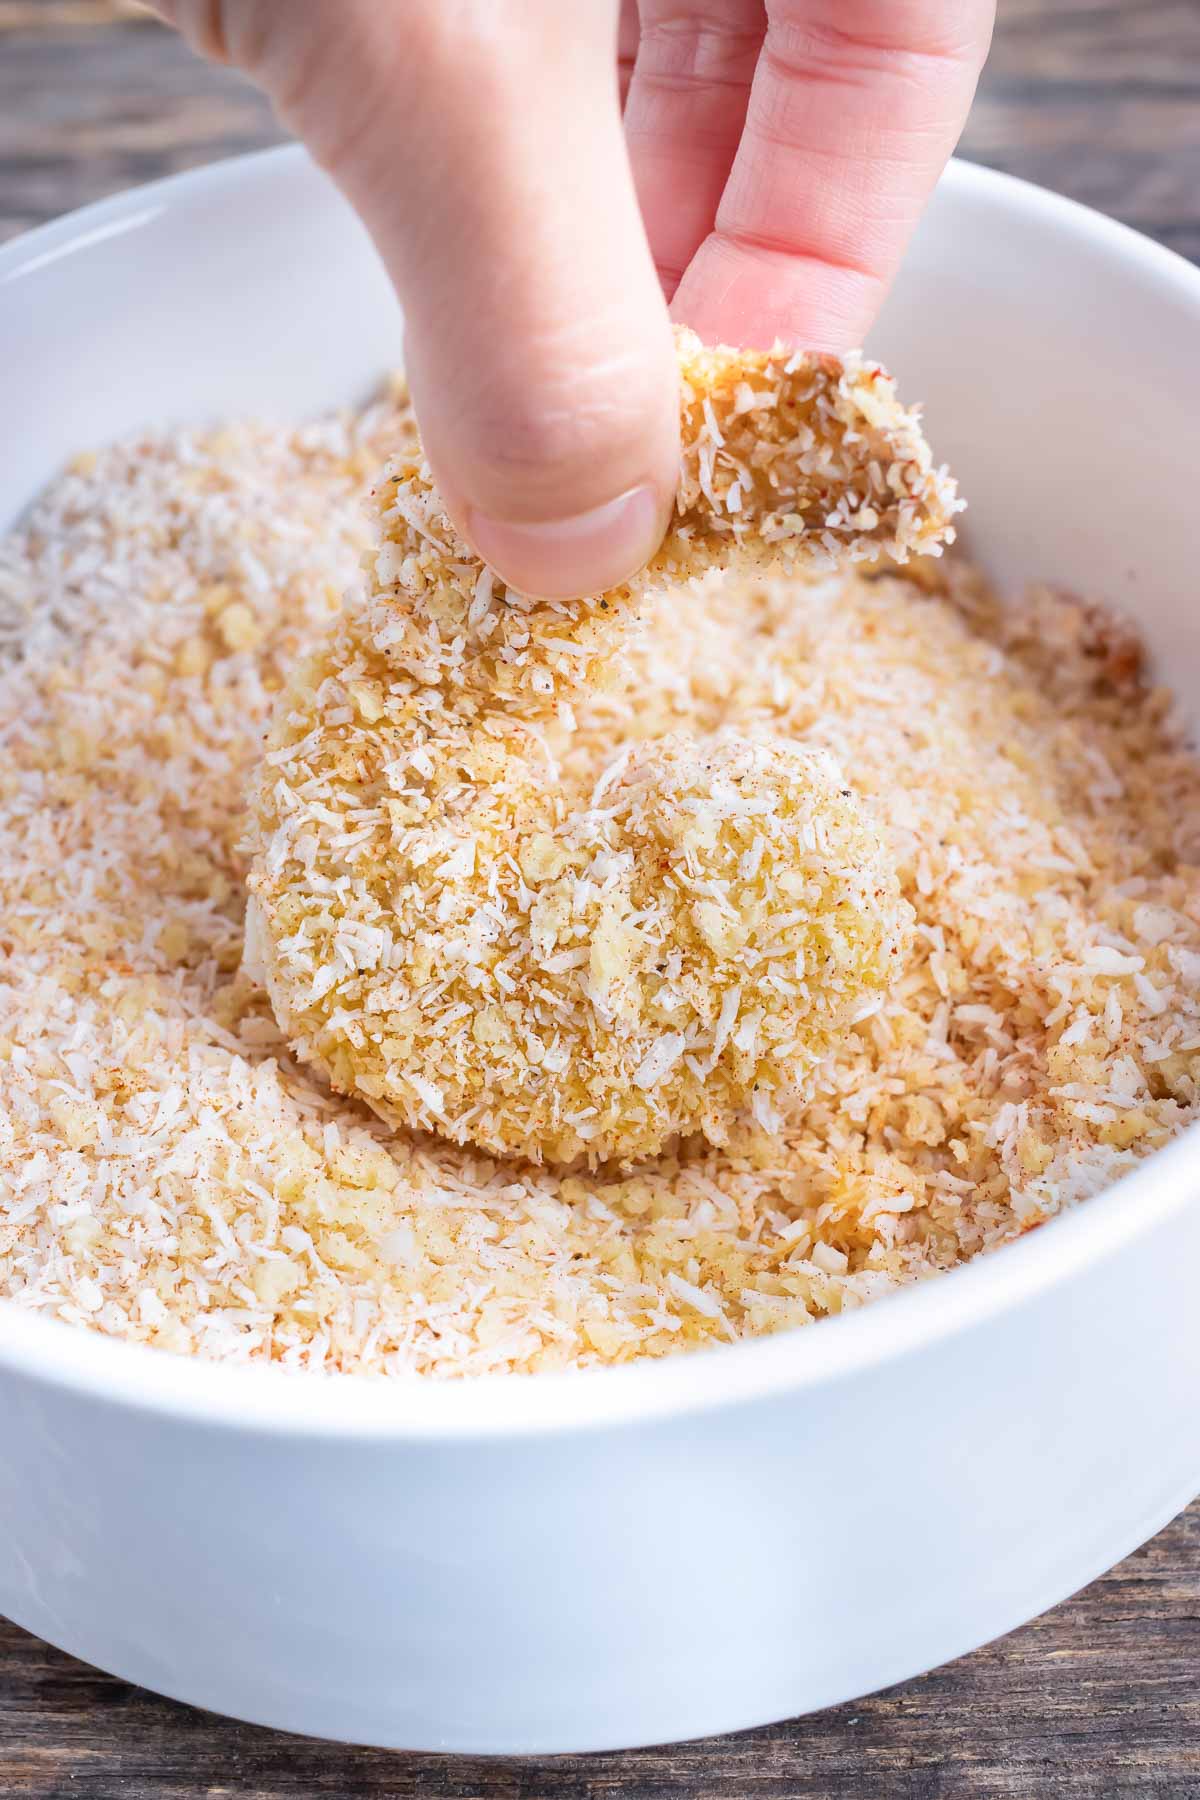 Floured shrimp is dipped into a breadcrumb mixture.